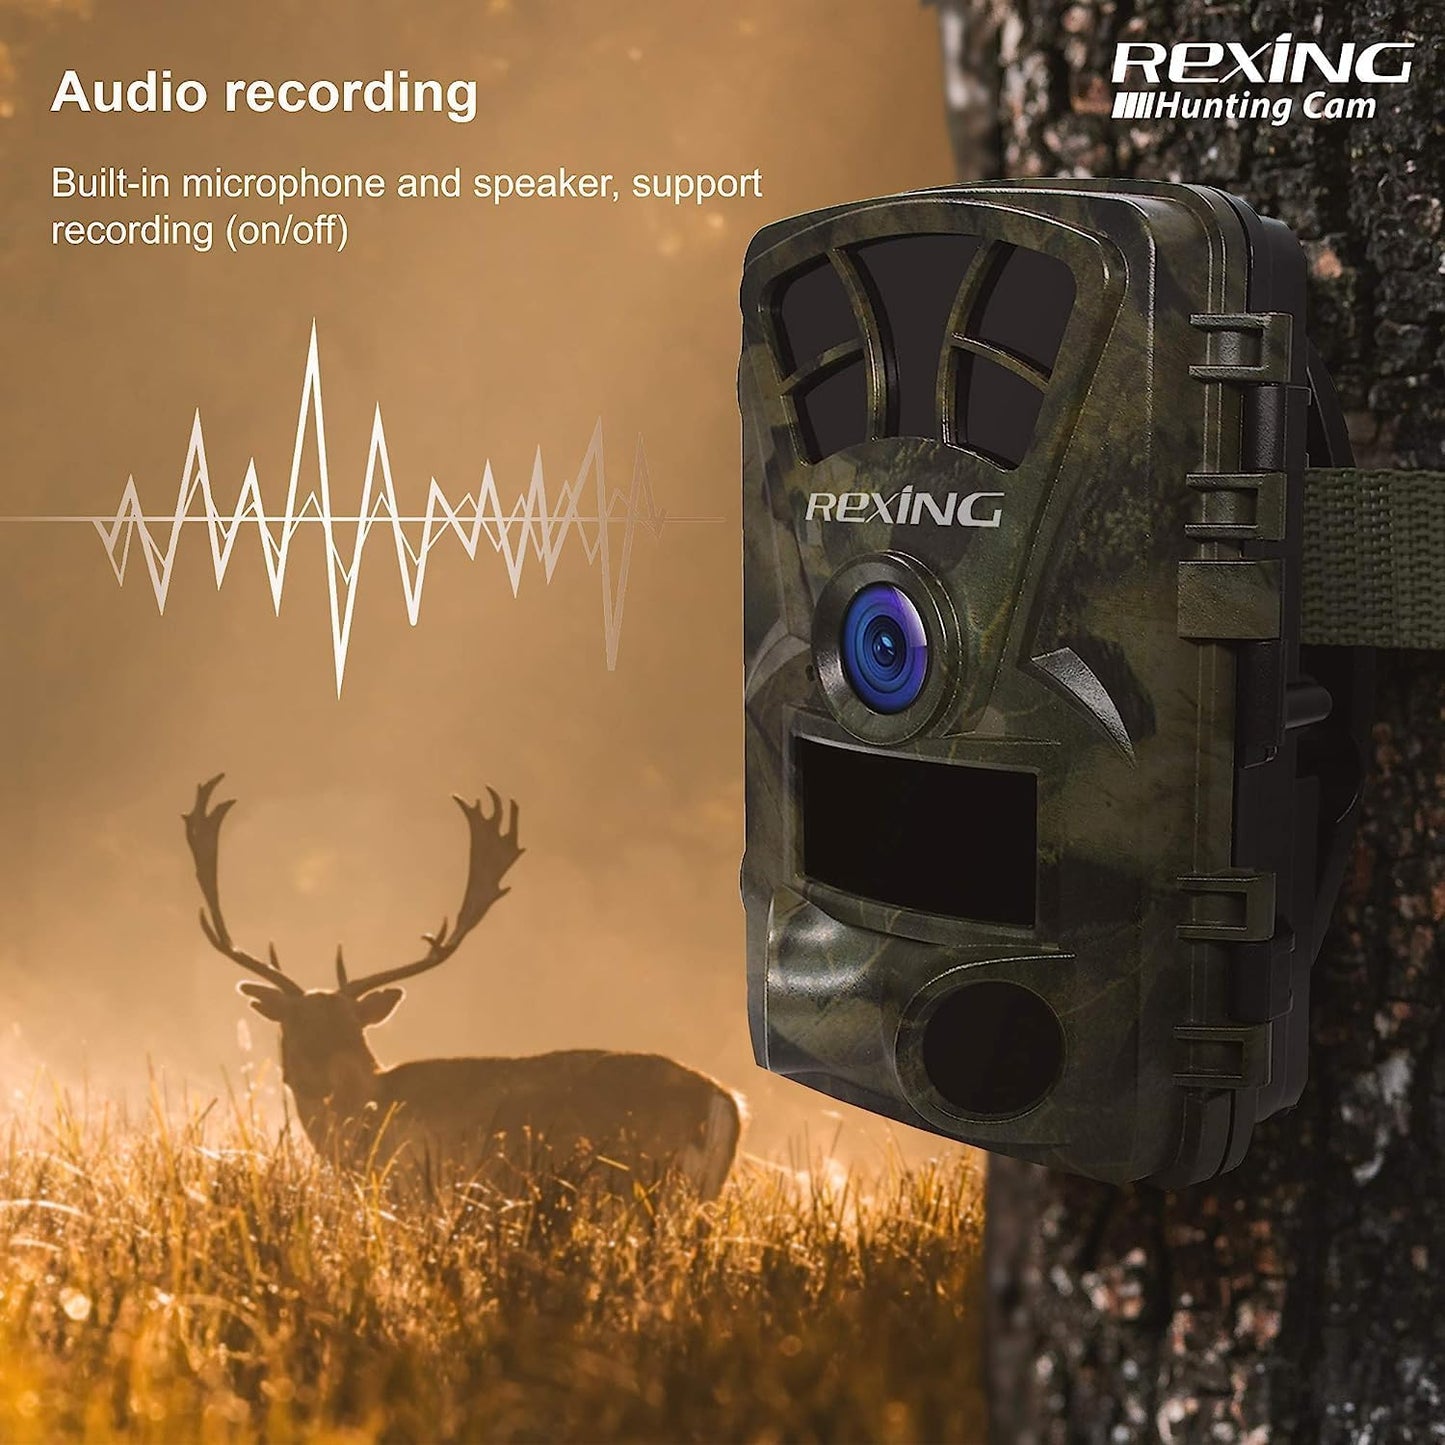 RexingUSA Woodlens H2-4K Wi-Fi Trail Camera, 20MP CMOS Motion Sensor, Ultra Night Vision, 512GB, AV Output, 12-Month Standby, for Hunting and Wildlife Monitoring